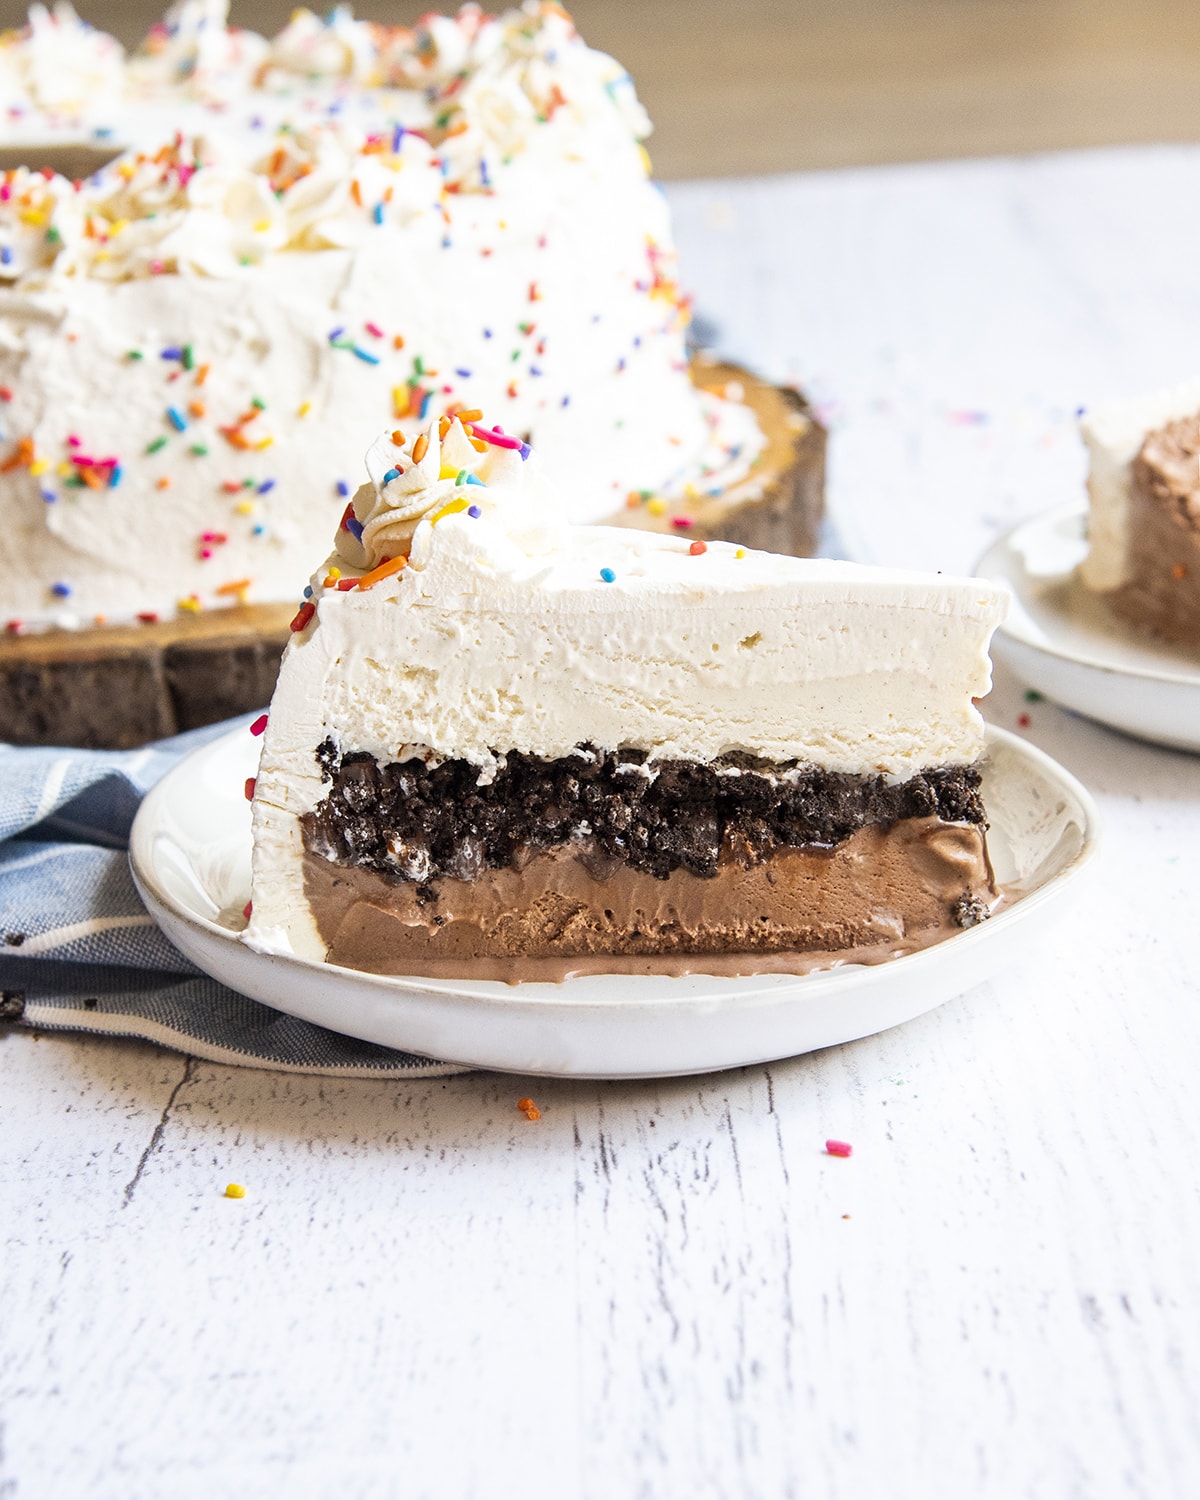 A piece of ice cream cake standing on a plate. The cake has chocolate ice cream then oreo crumbs, then vanilla icecream, and whipped cream on the outside and top like frosting.